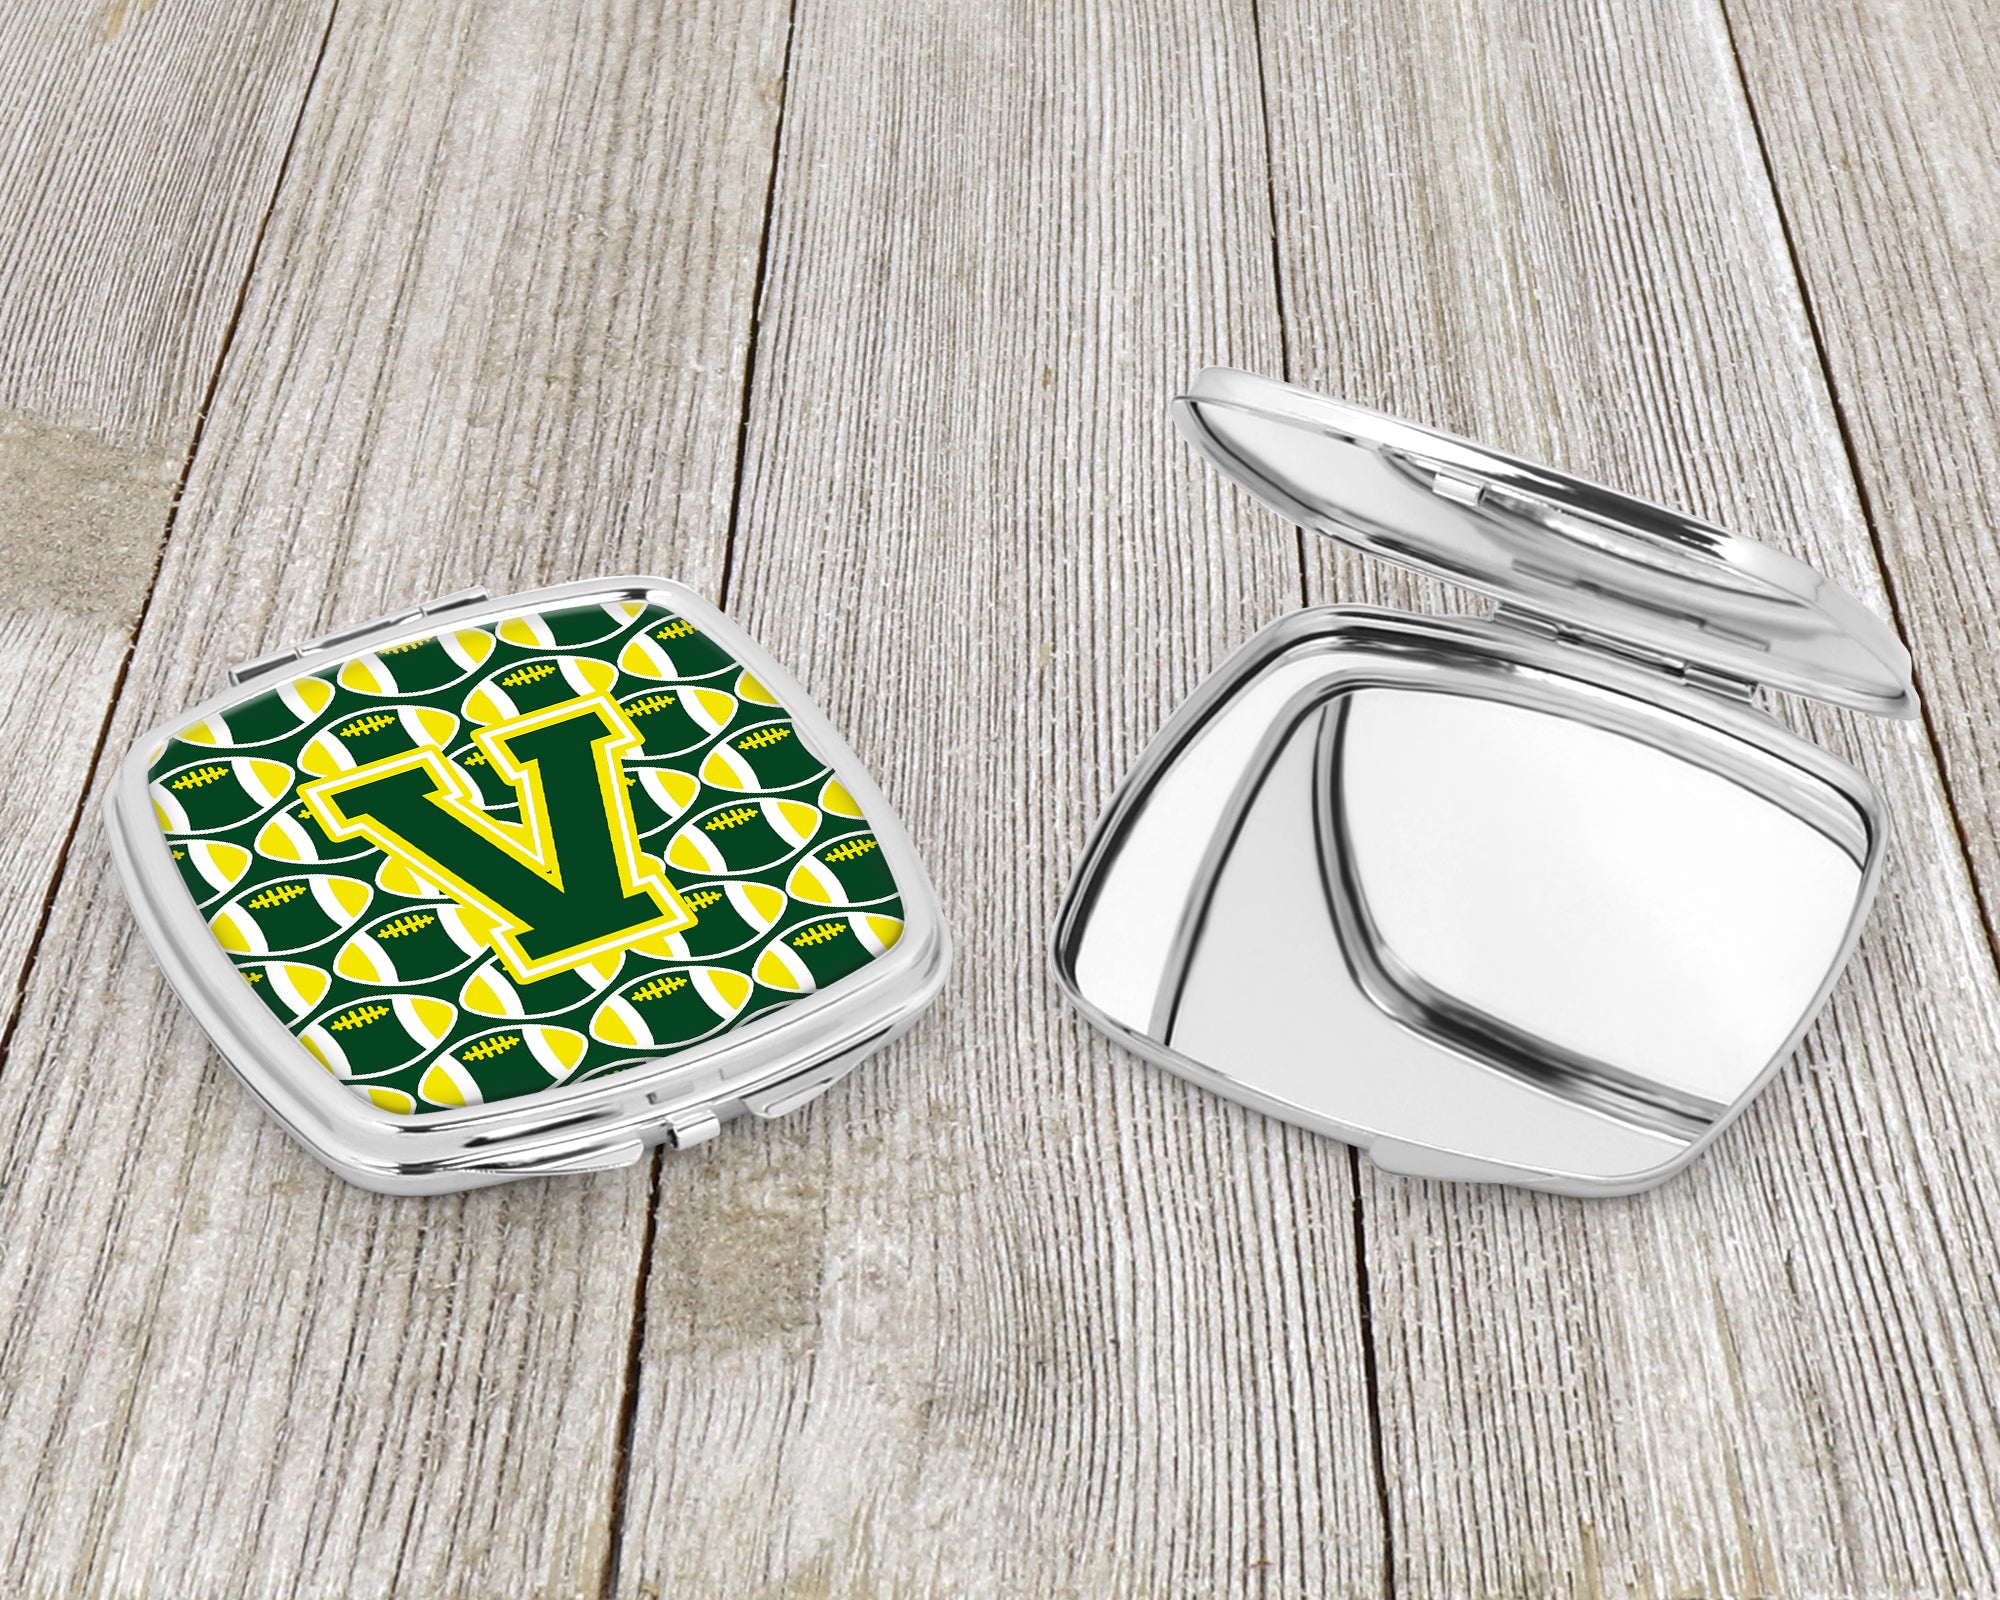 Letter V Football Green and Yellow Compact Mirror CJ1075-VSCM  the-store.com.